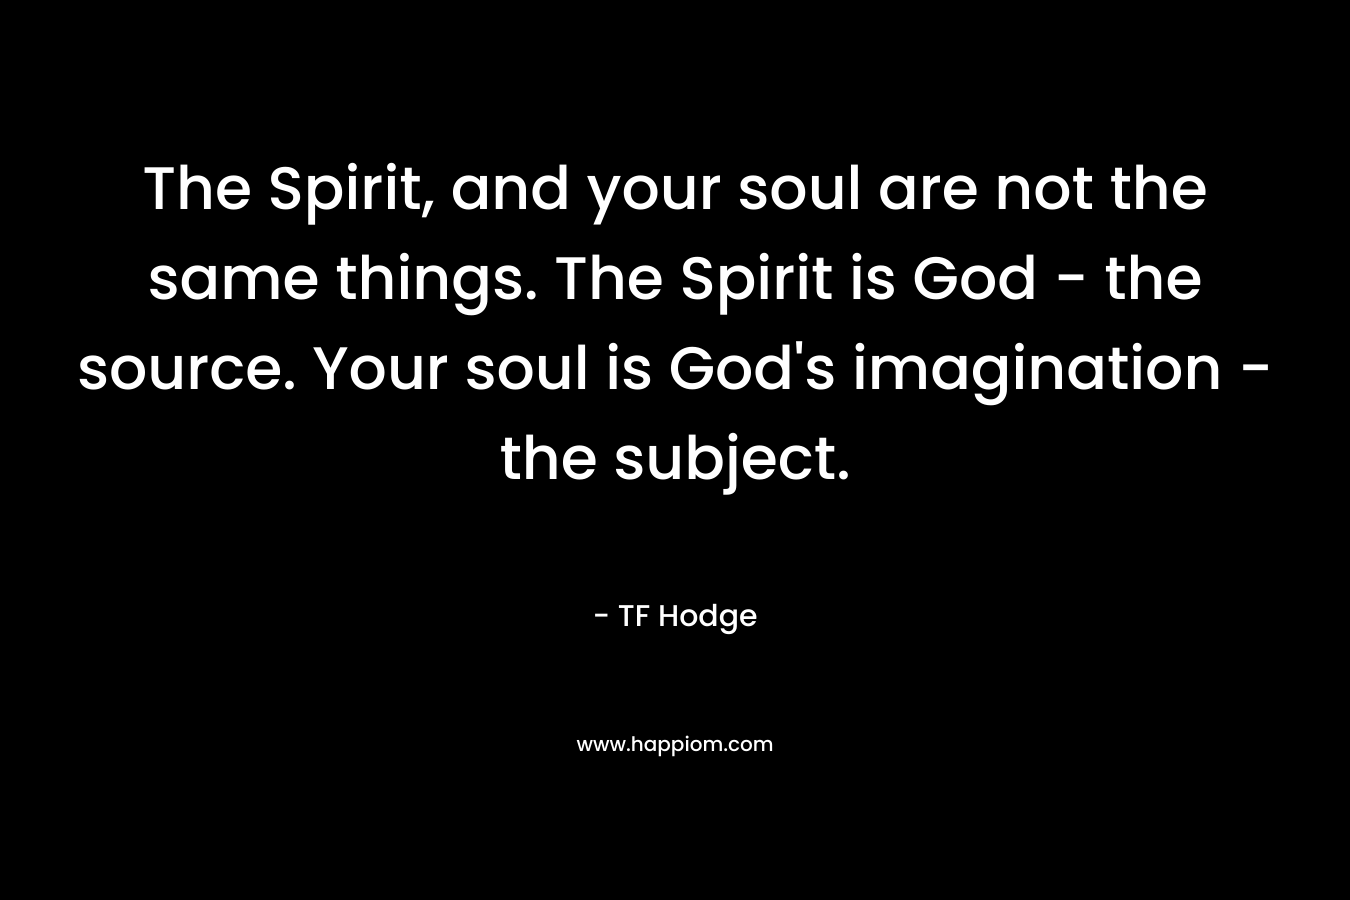 The Spirit, and your soul are not the same things. The Spirit is God - the source. Your soul is God's imagination - the subject.